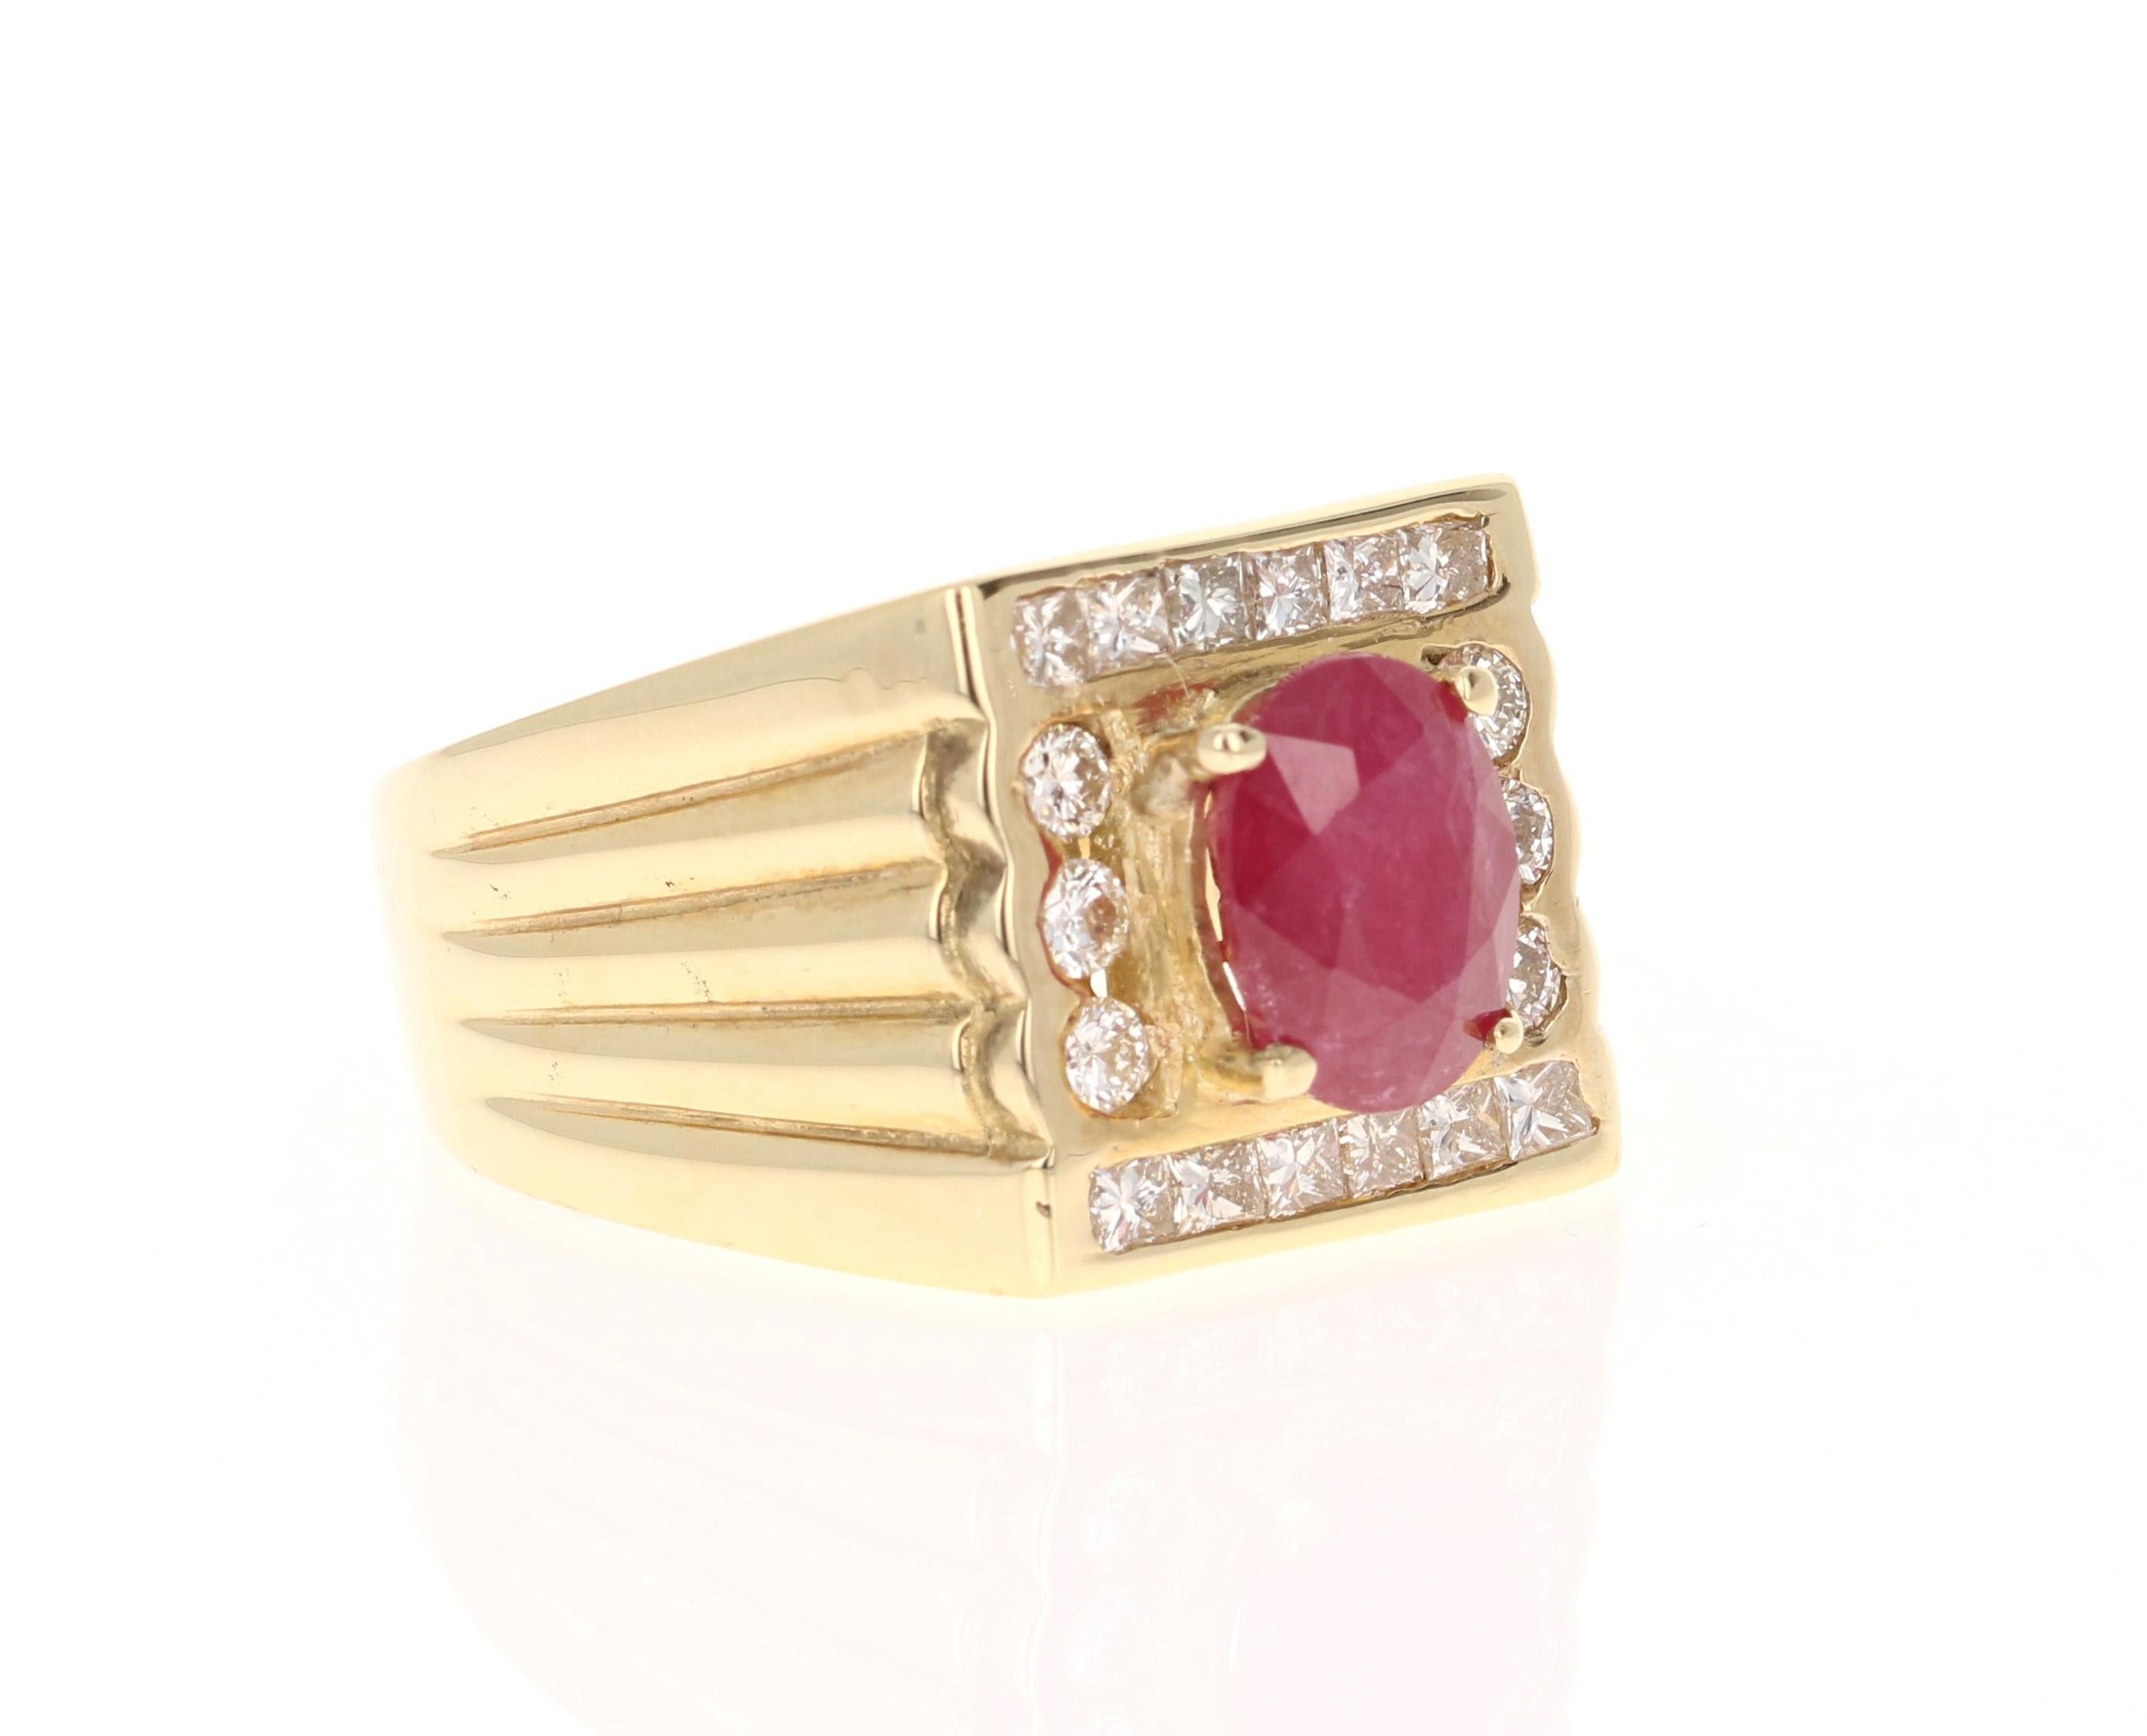 This amazing piece is set with a beautiful oval cut Ruby that weighs 2.45 Carats and has 12 Princess Cut Diamonds that weighs 0.46 Carats and 6 Round Cut Diamonds that weigh 0.28 Carats. The Total Carat Weight of the ring is 3.19 Carats. 

It is